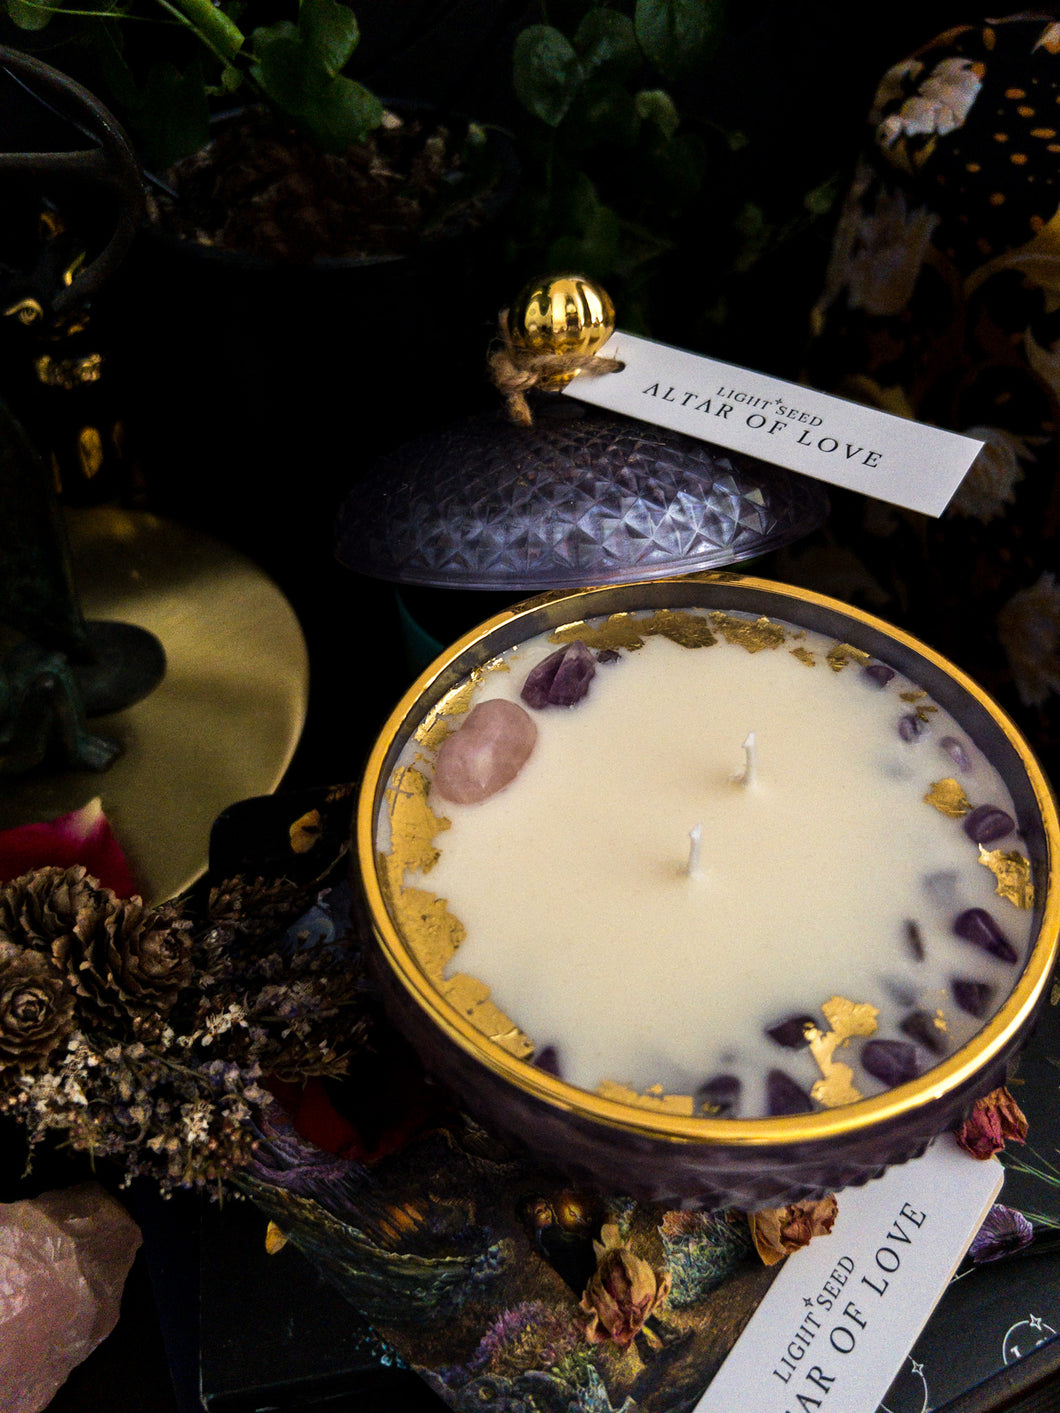 ALTAR OF LOVE - Candle in a Violet Geo Cut Vessel with Gold Rim - Amethyst & Rose Quartz Crystals $148